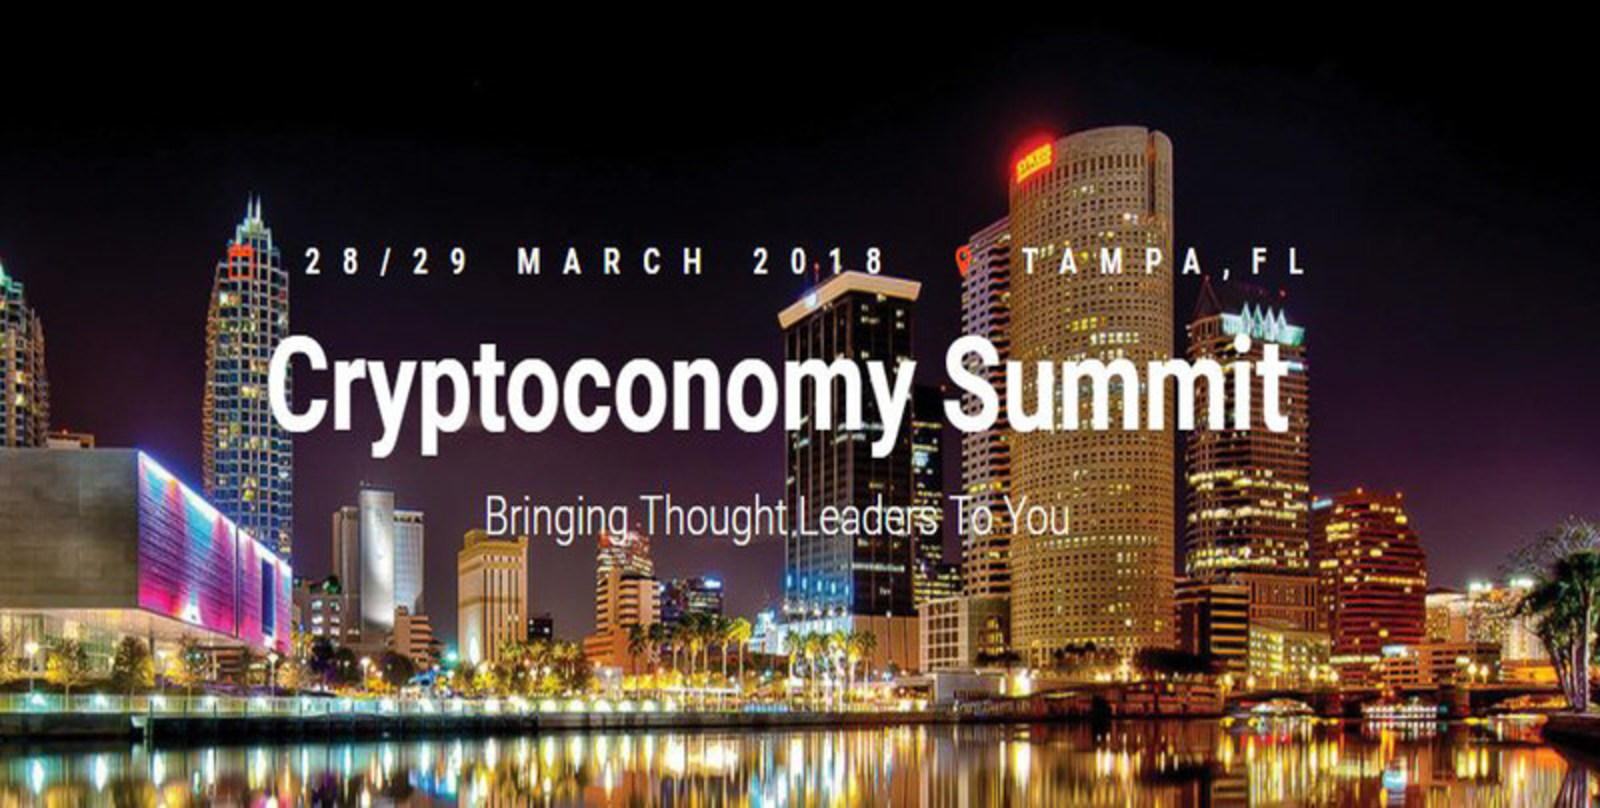 The Cryptoconomy Summit, March 28-29 2018, Tampa Convention Center, Tampa, Florida